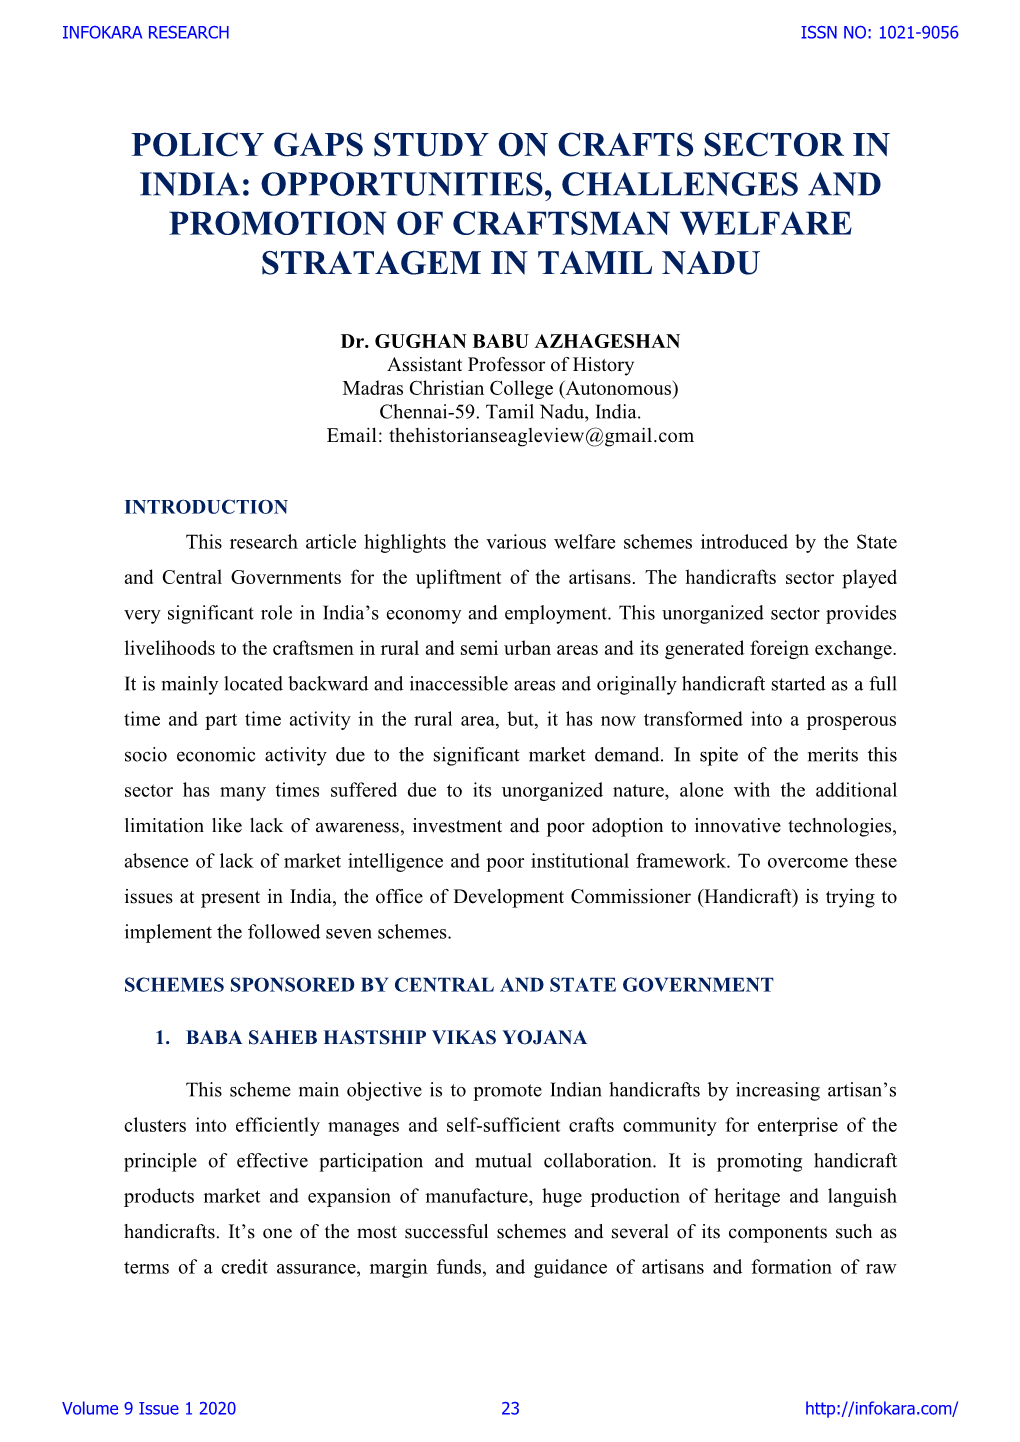 Policy Gaps Study on Crafts Sector in India: Opportunities, Challenges and Promotion of Craftsman Welfare Stratagem in Tamil Nadu